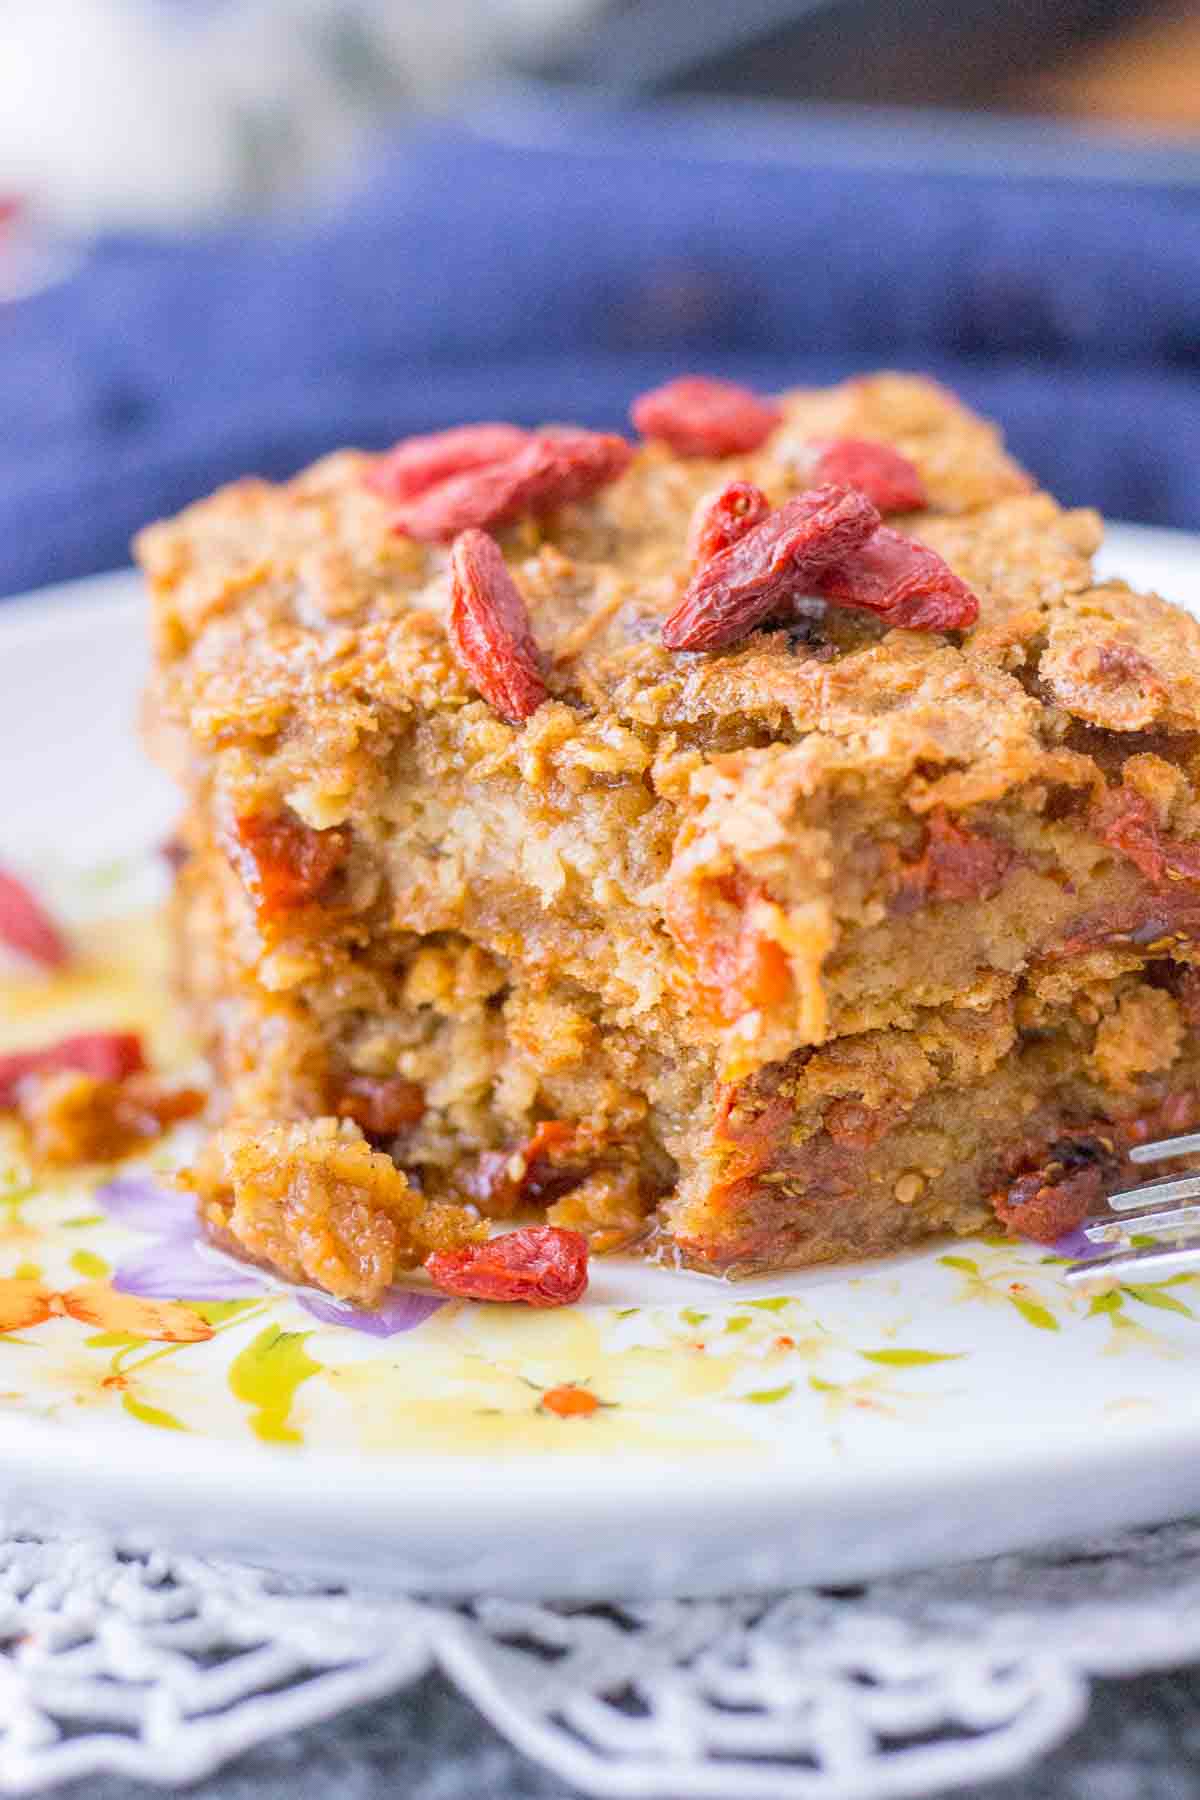 Carrot Cake Baked Oatmeal served on a plate